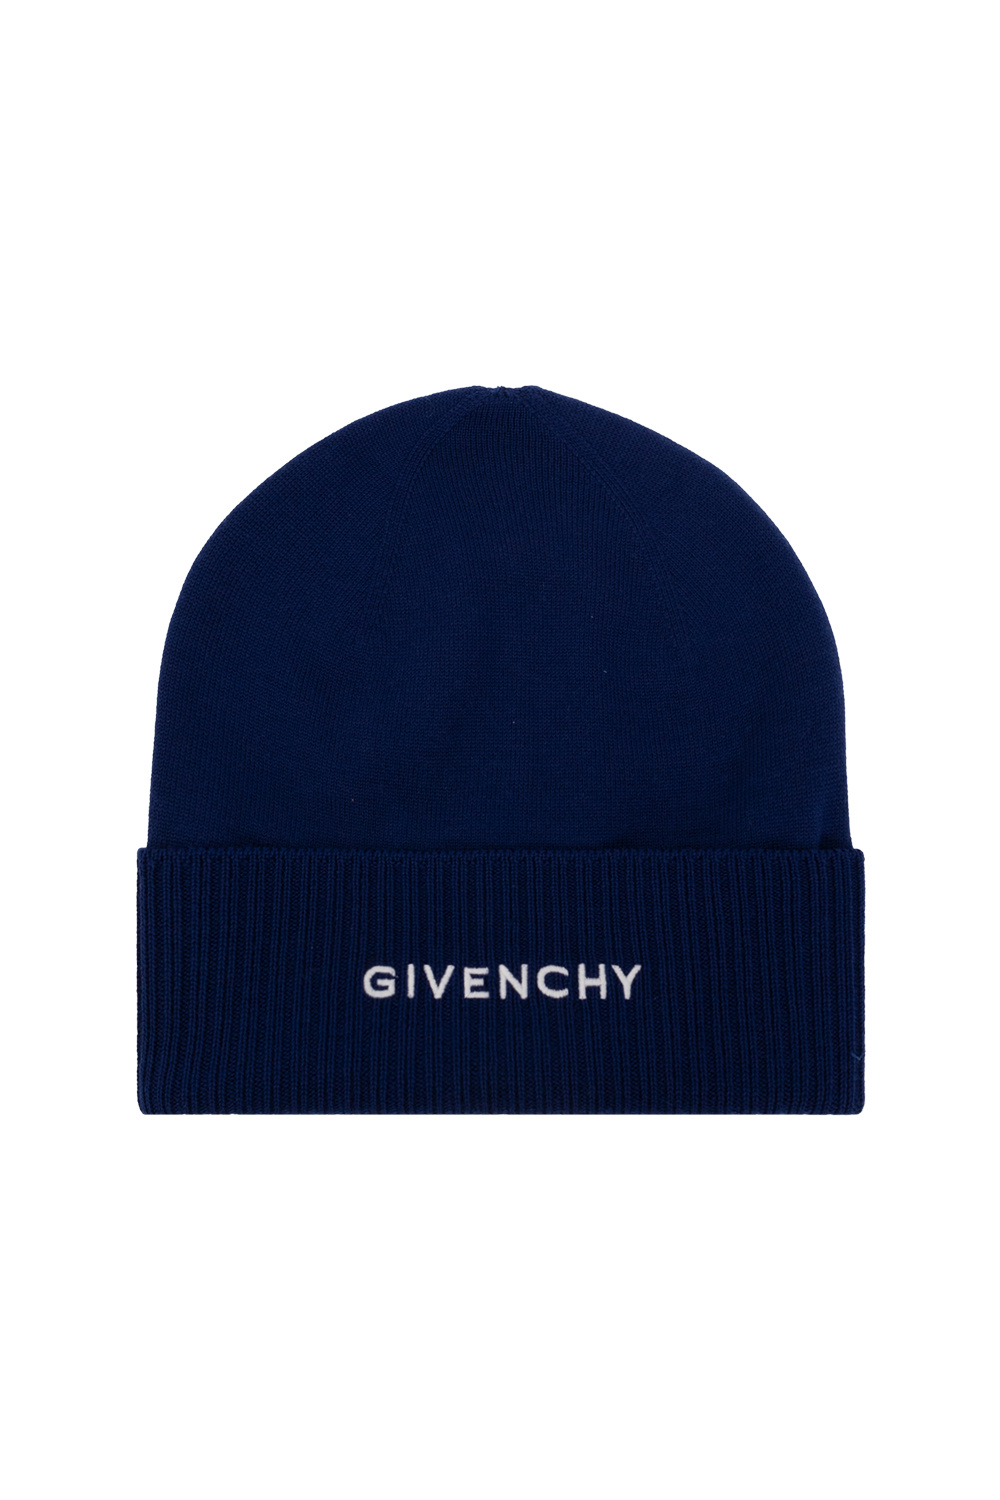 givenchy boots Beanie with logo